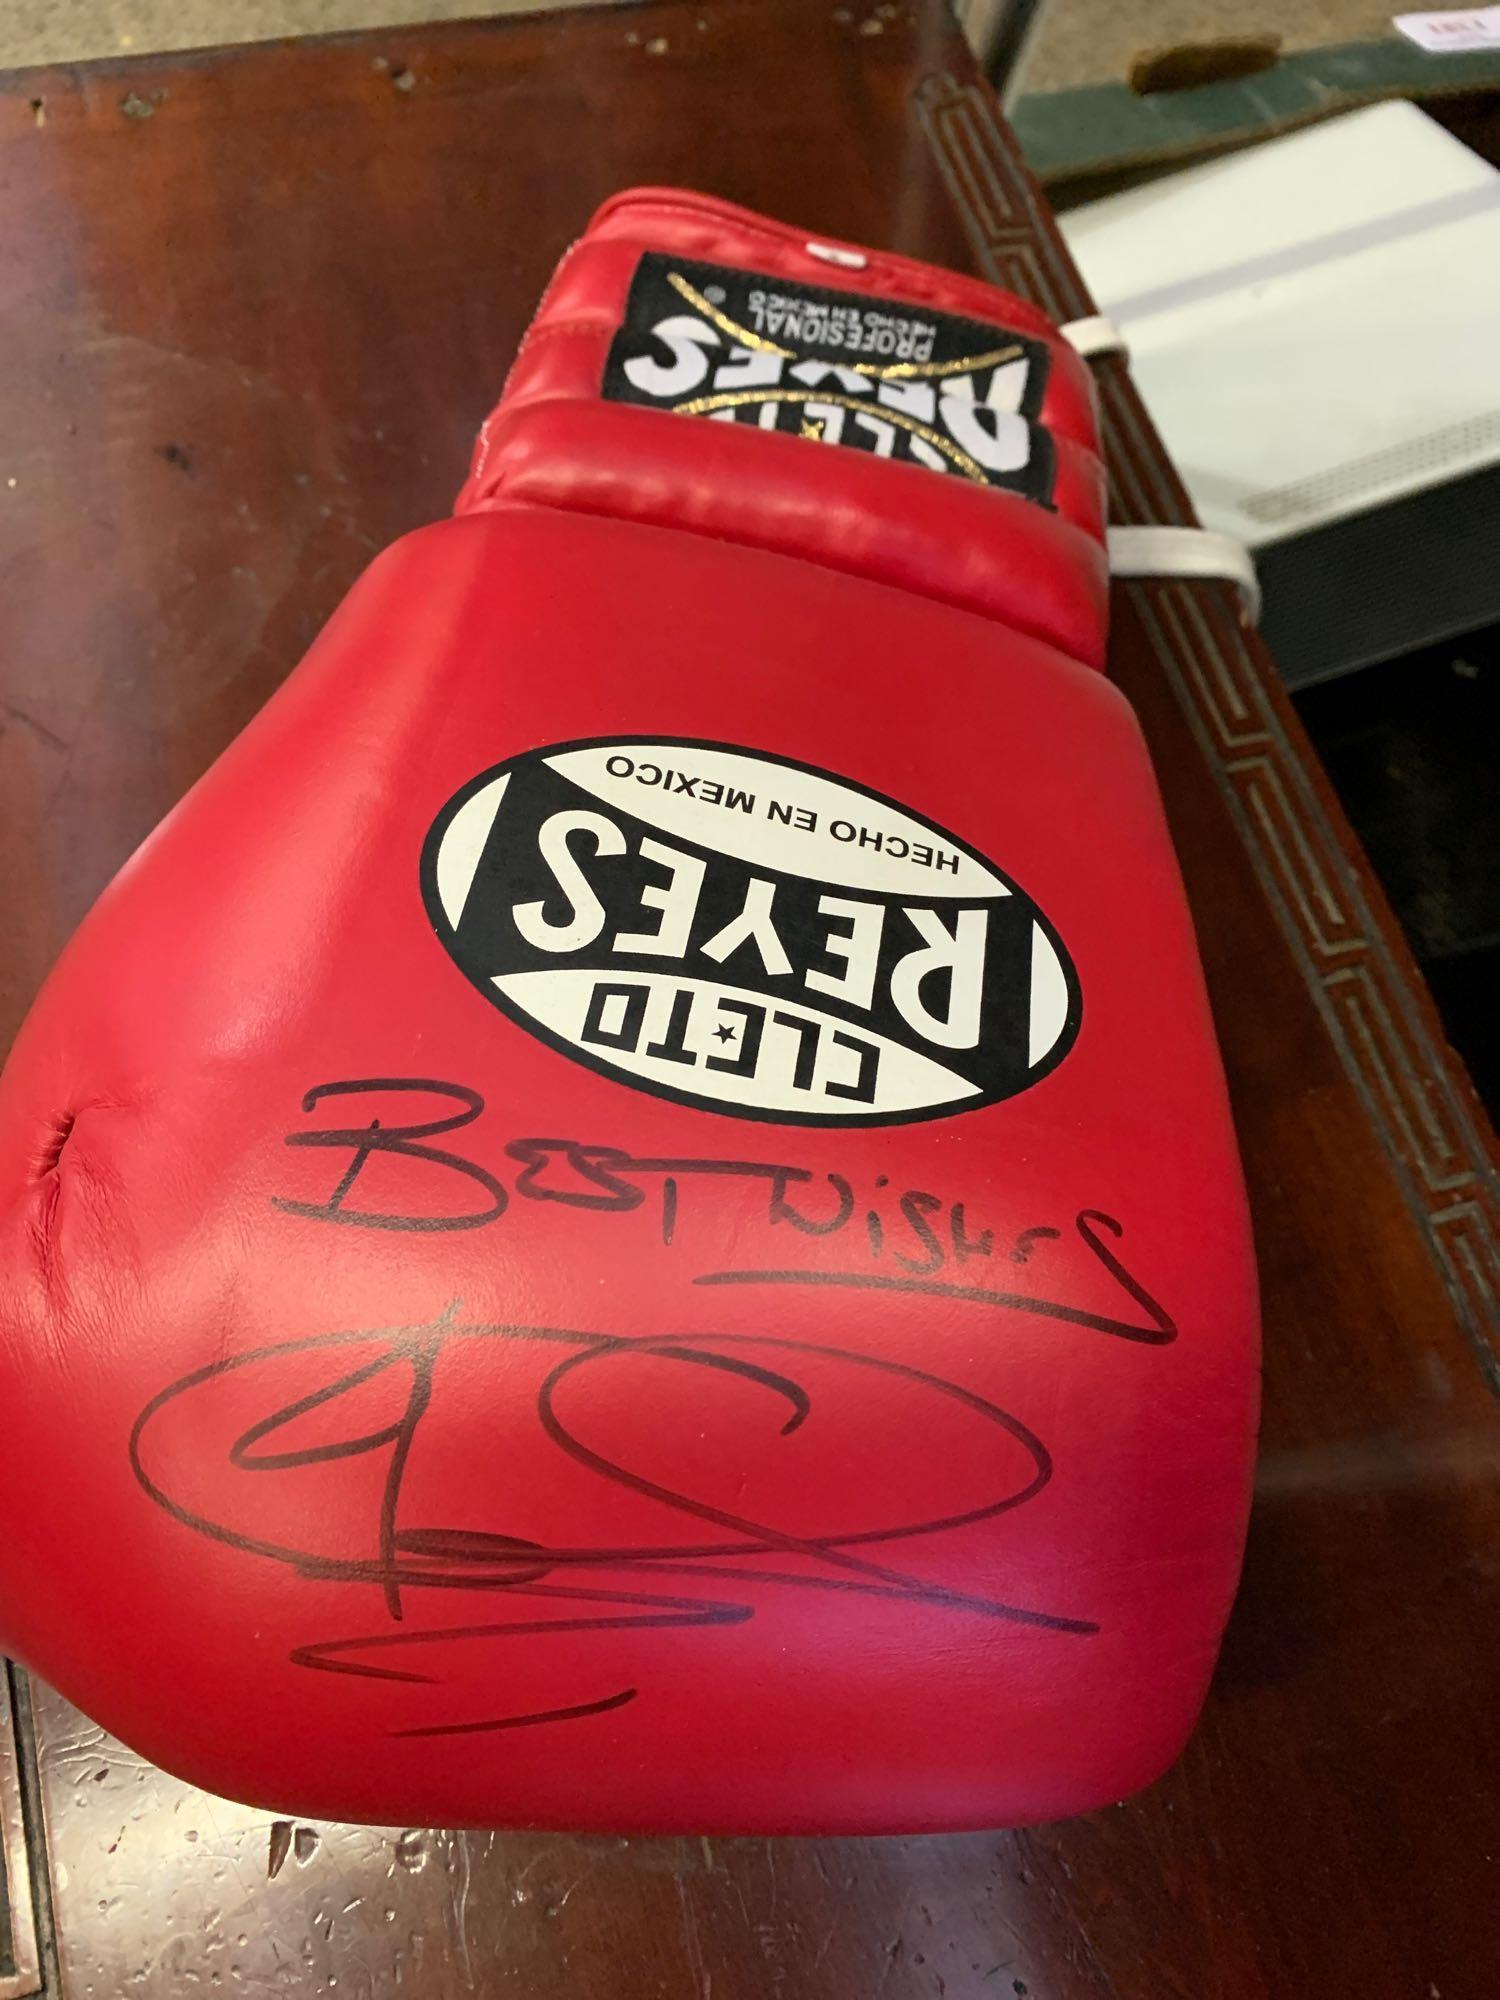 Signed boxing glove. This item carries VAT.